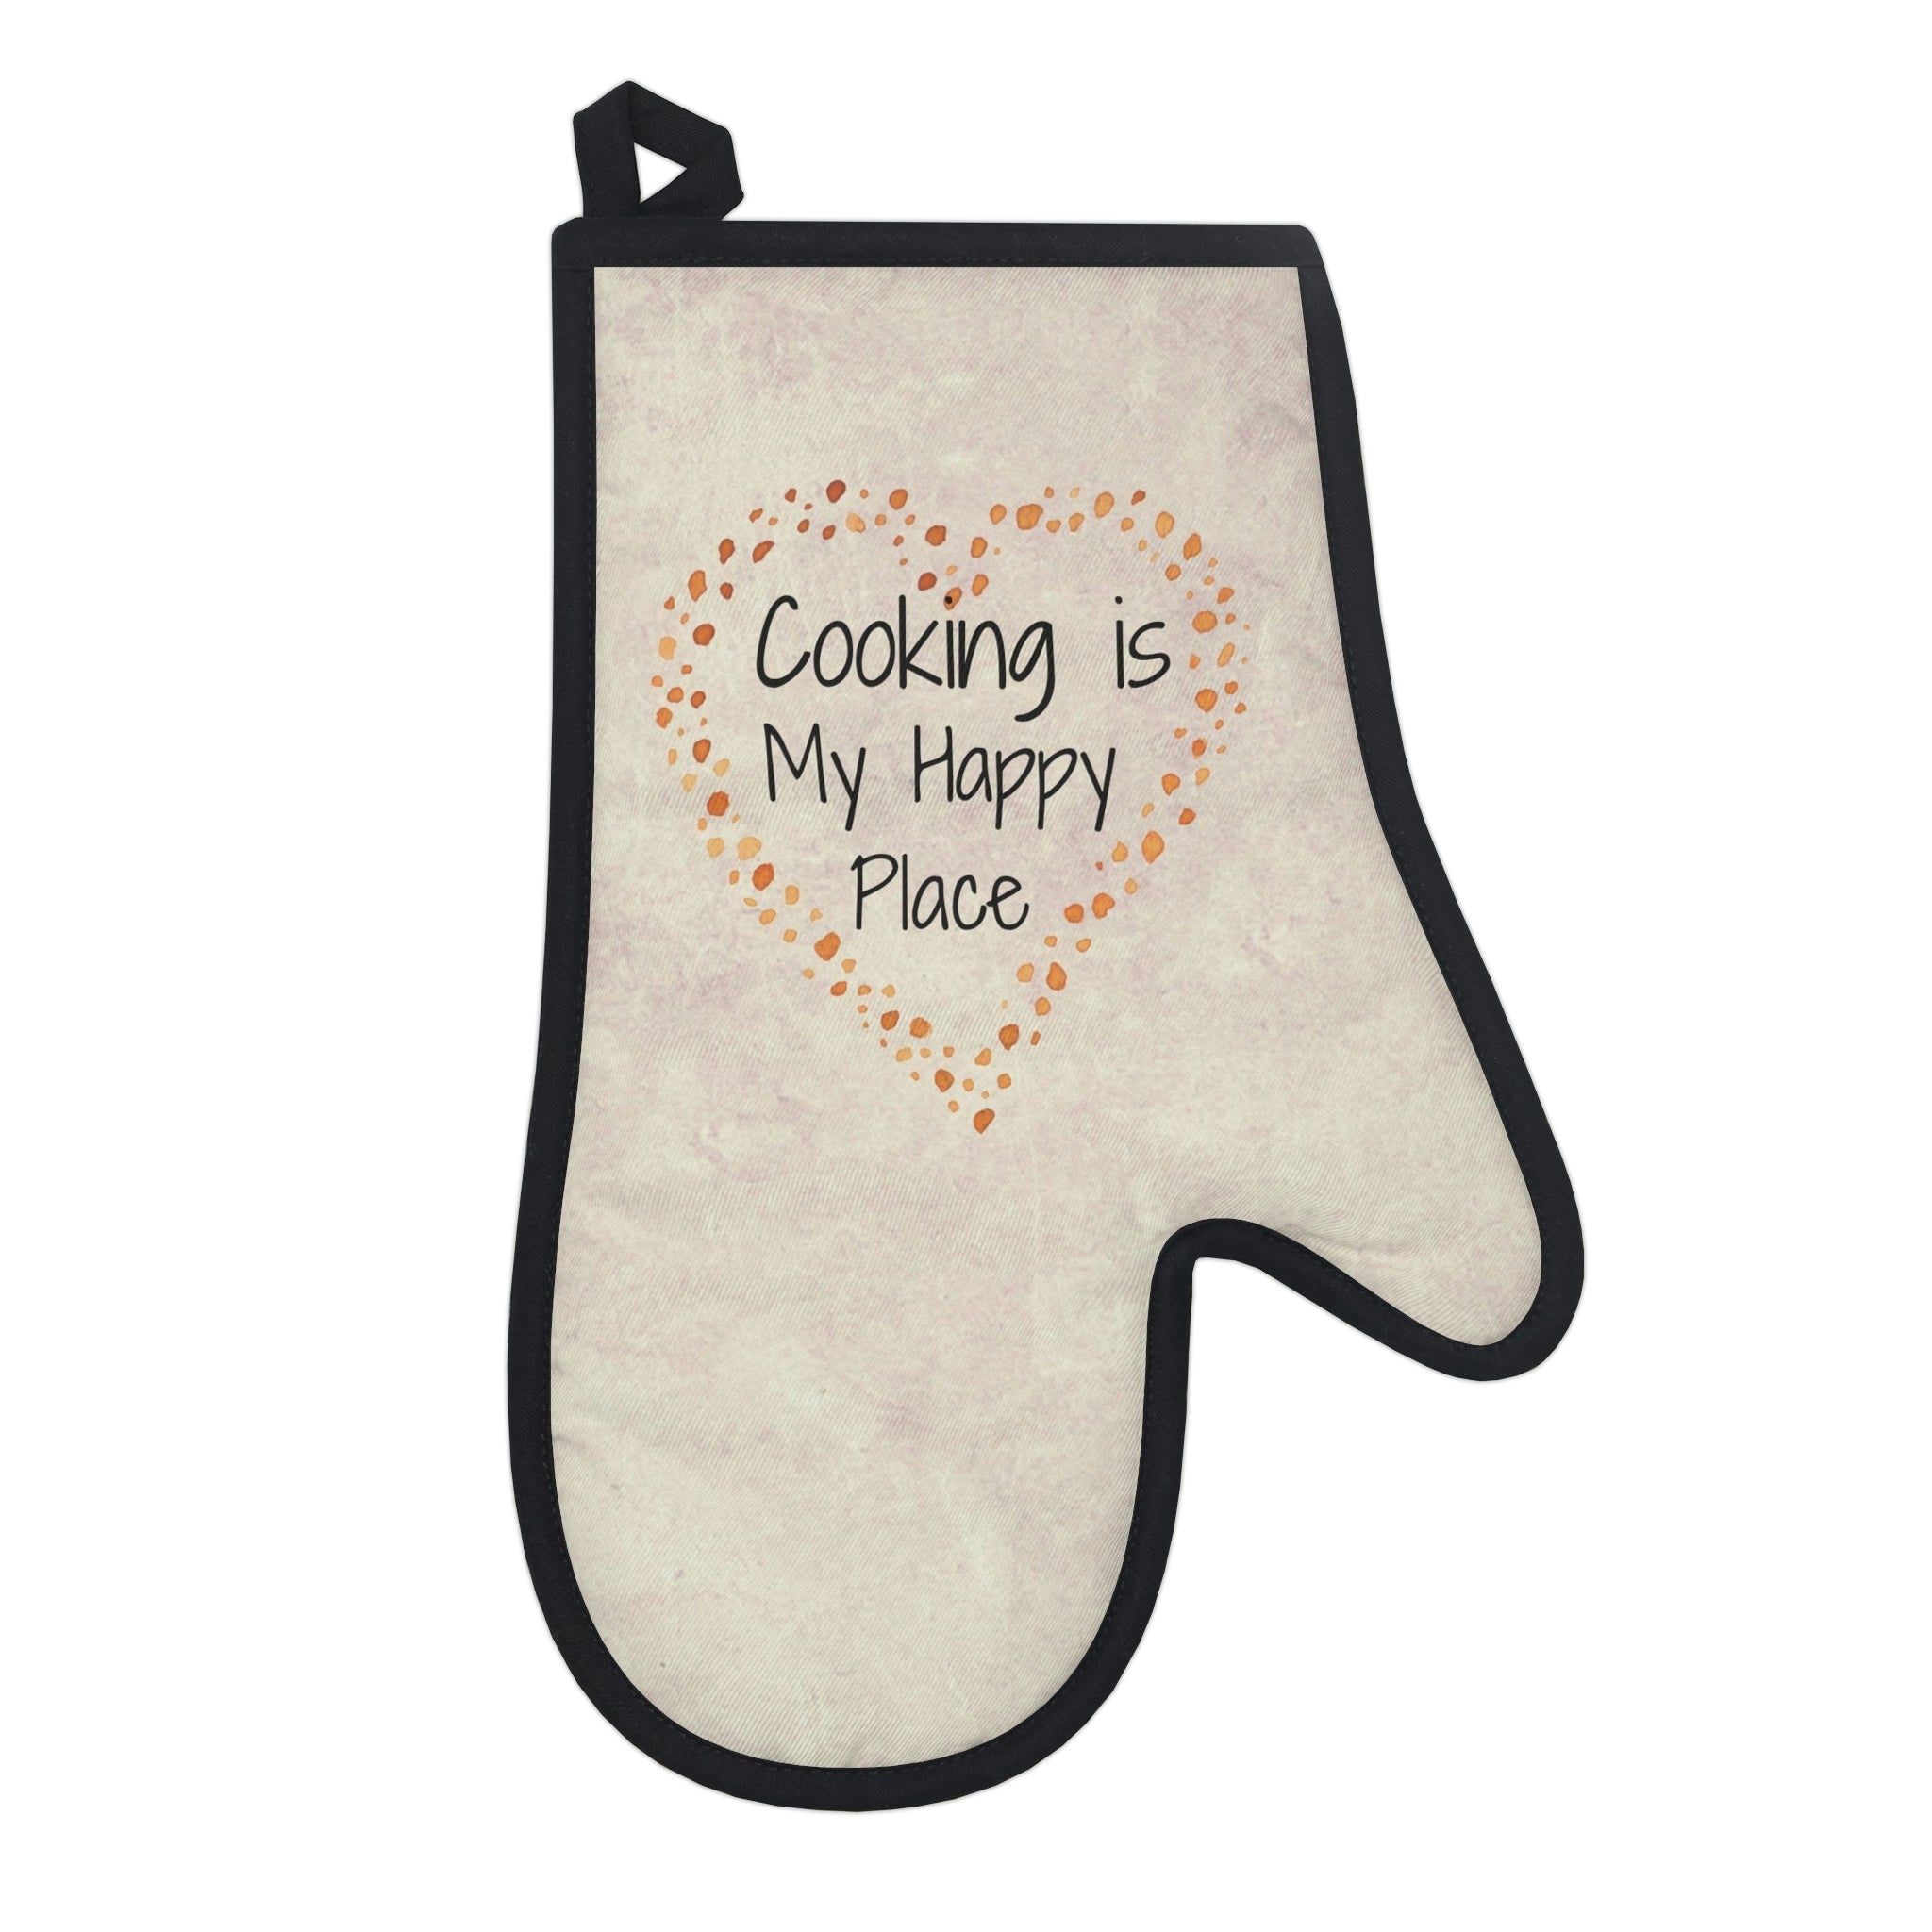 Oven mitts, potholders, happy place, oven gloves, heat insulation and protection, love cooking, cooking enthusiast, cotton trim - cooking#8